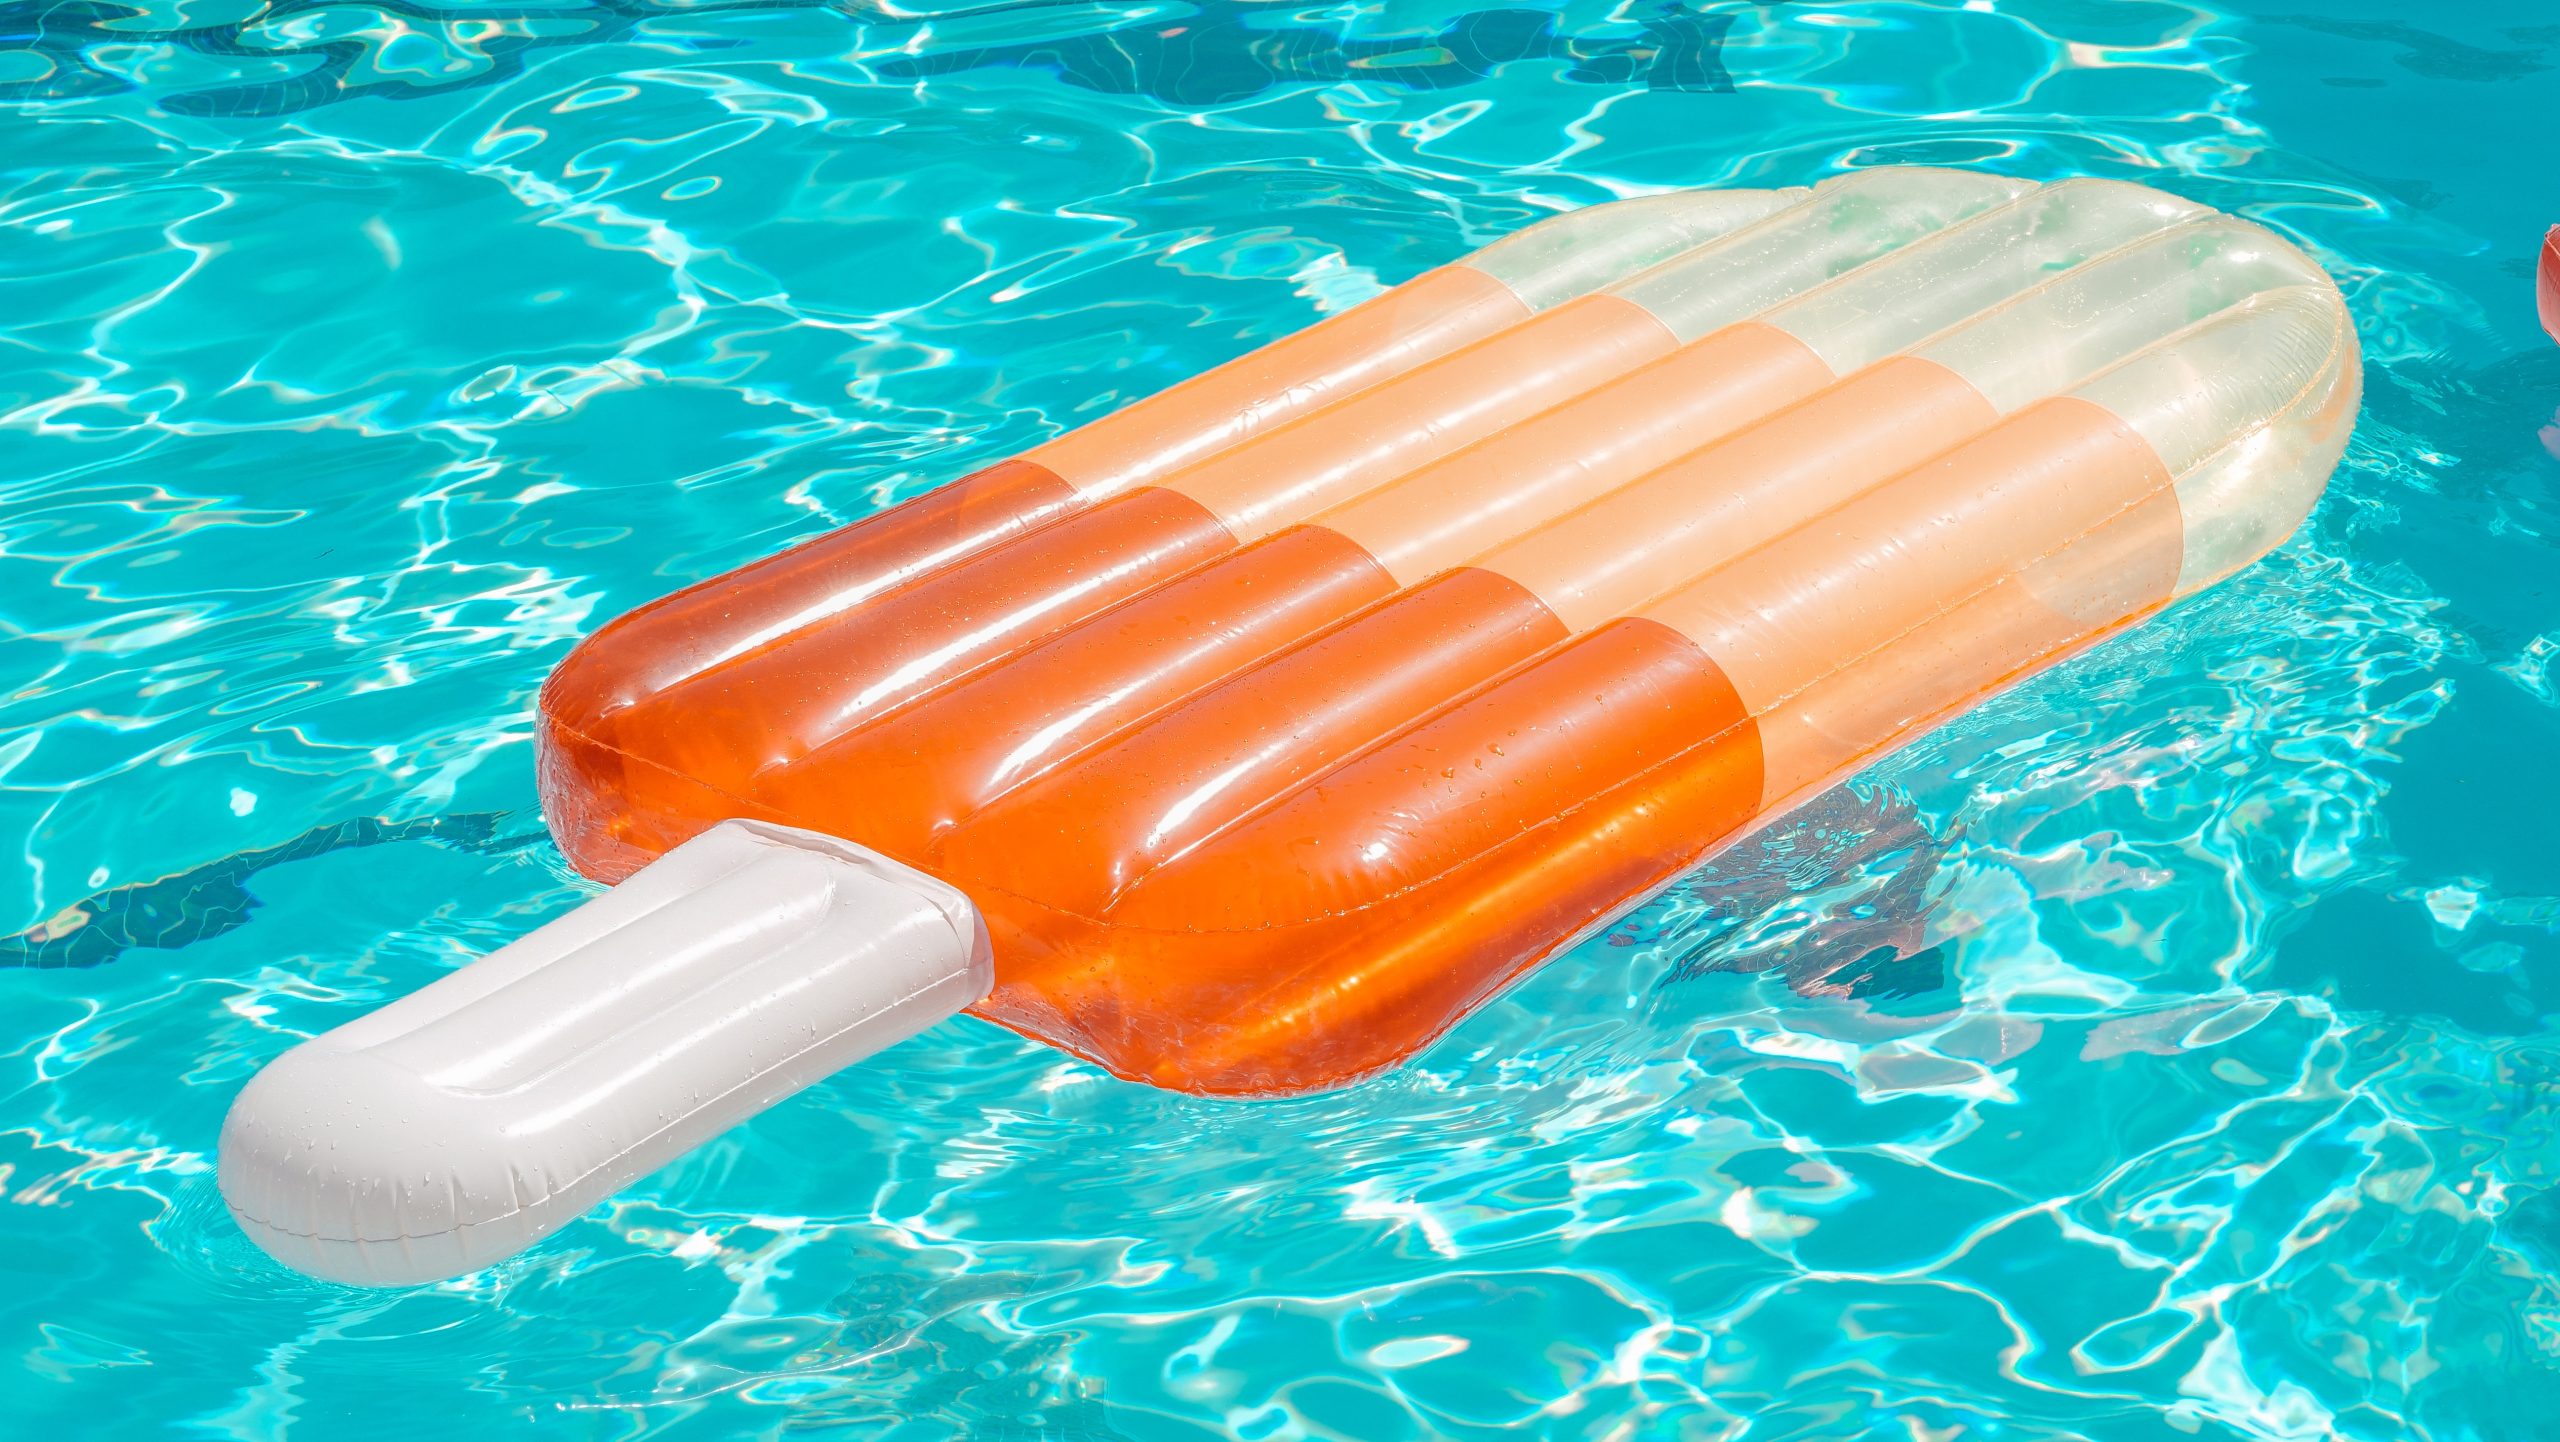 An orange popsicle shaped pool float, floating in a pool. This picture represents summer. 